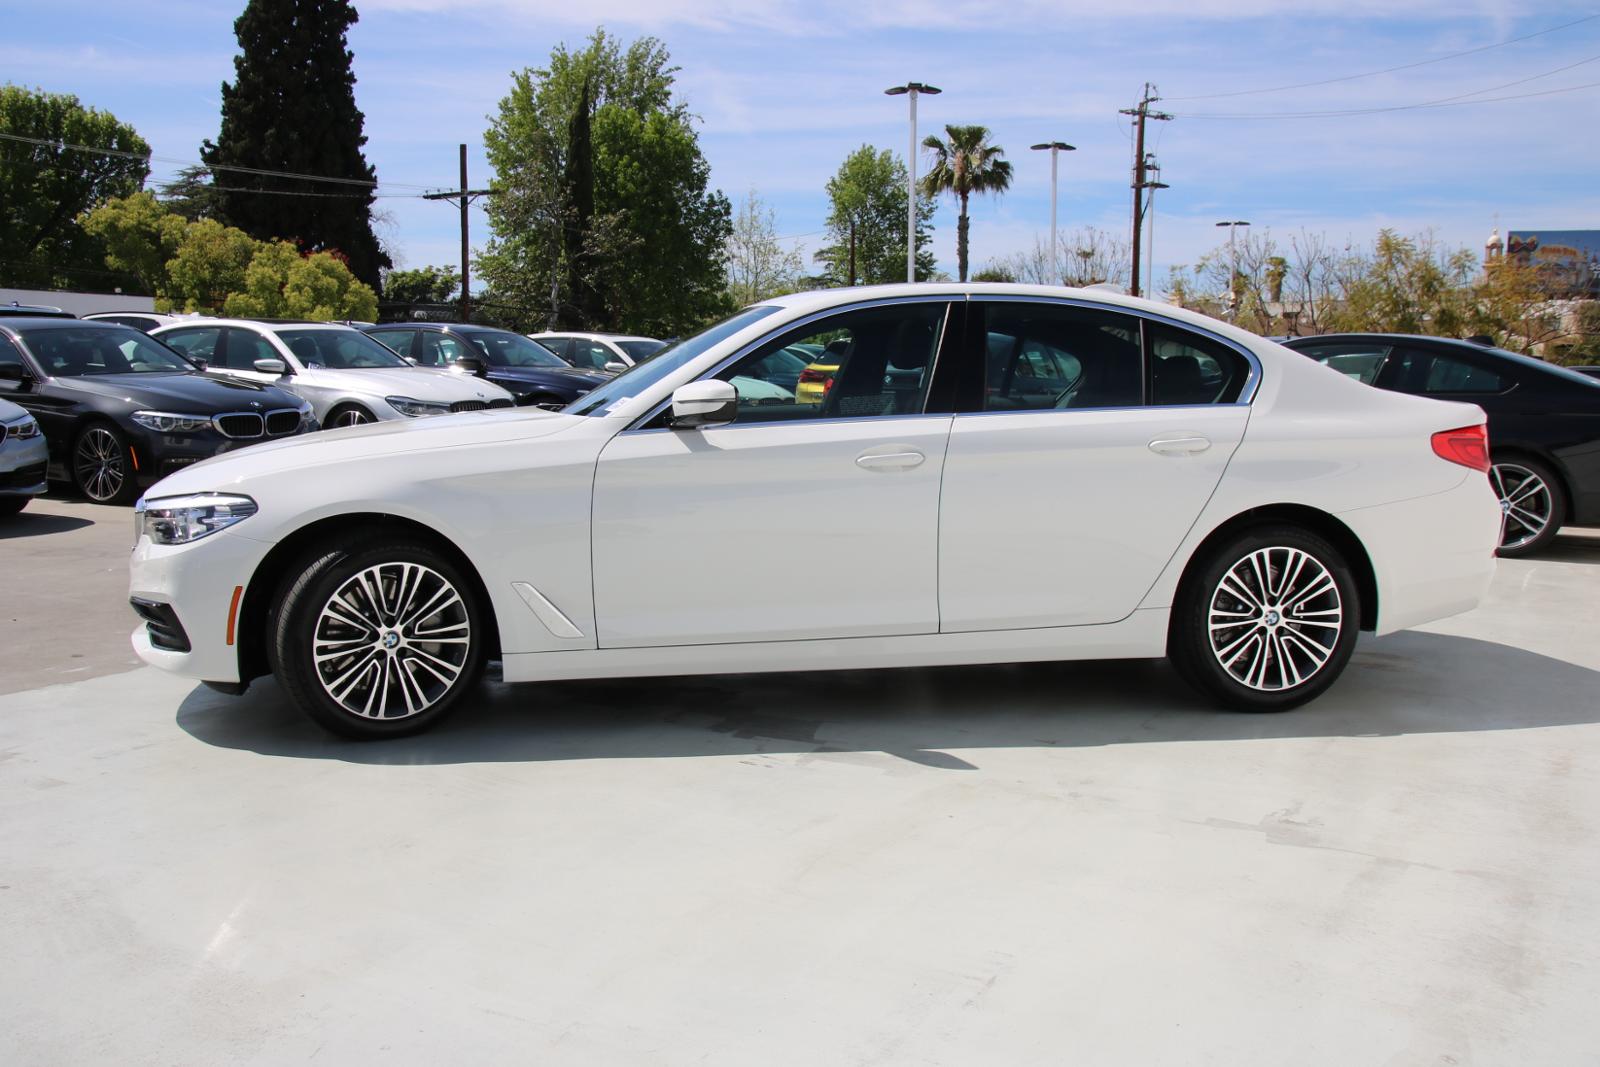 Pre-Owned 2019 BMW 5 Series 530i 530i Sedan in North Hollywood #L67463 ...